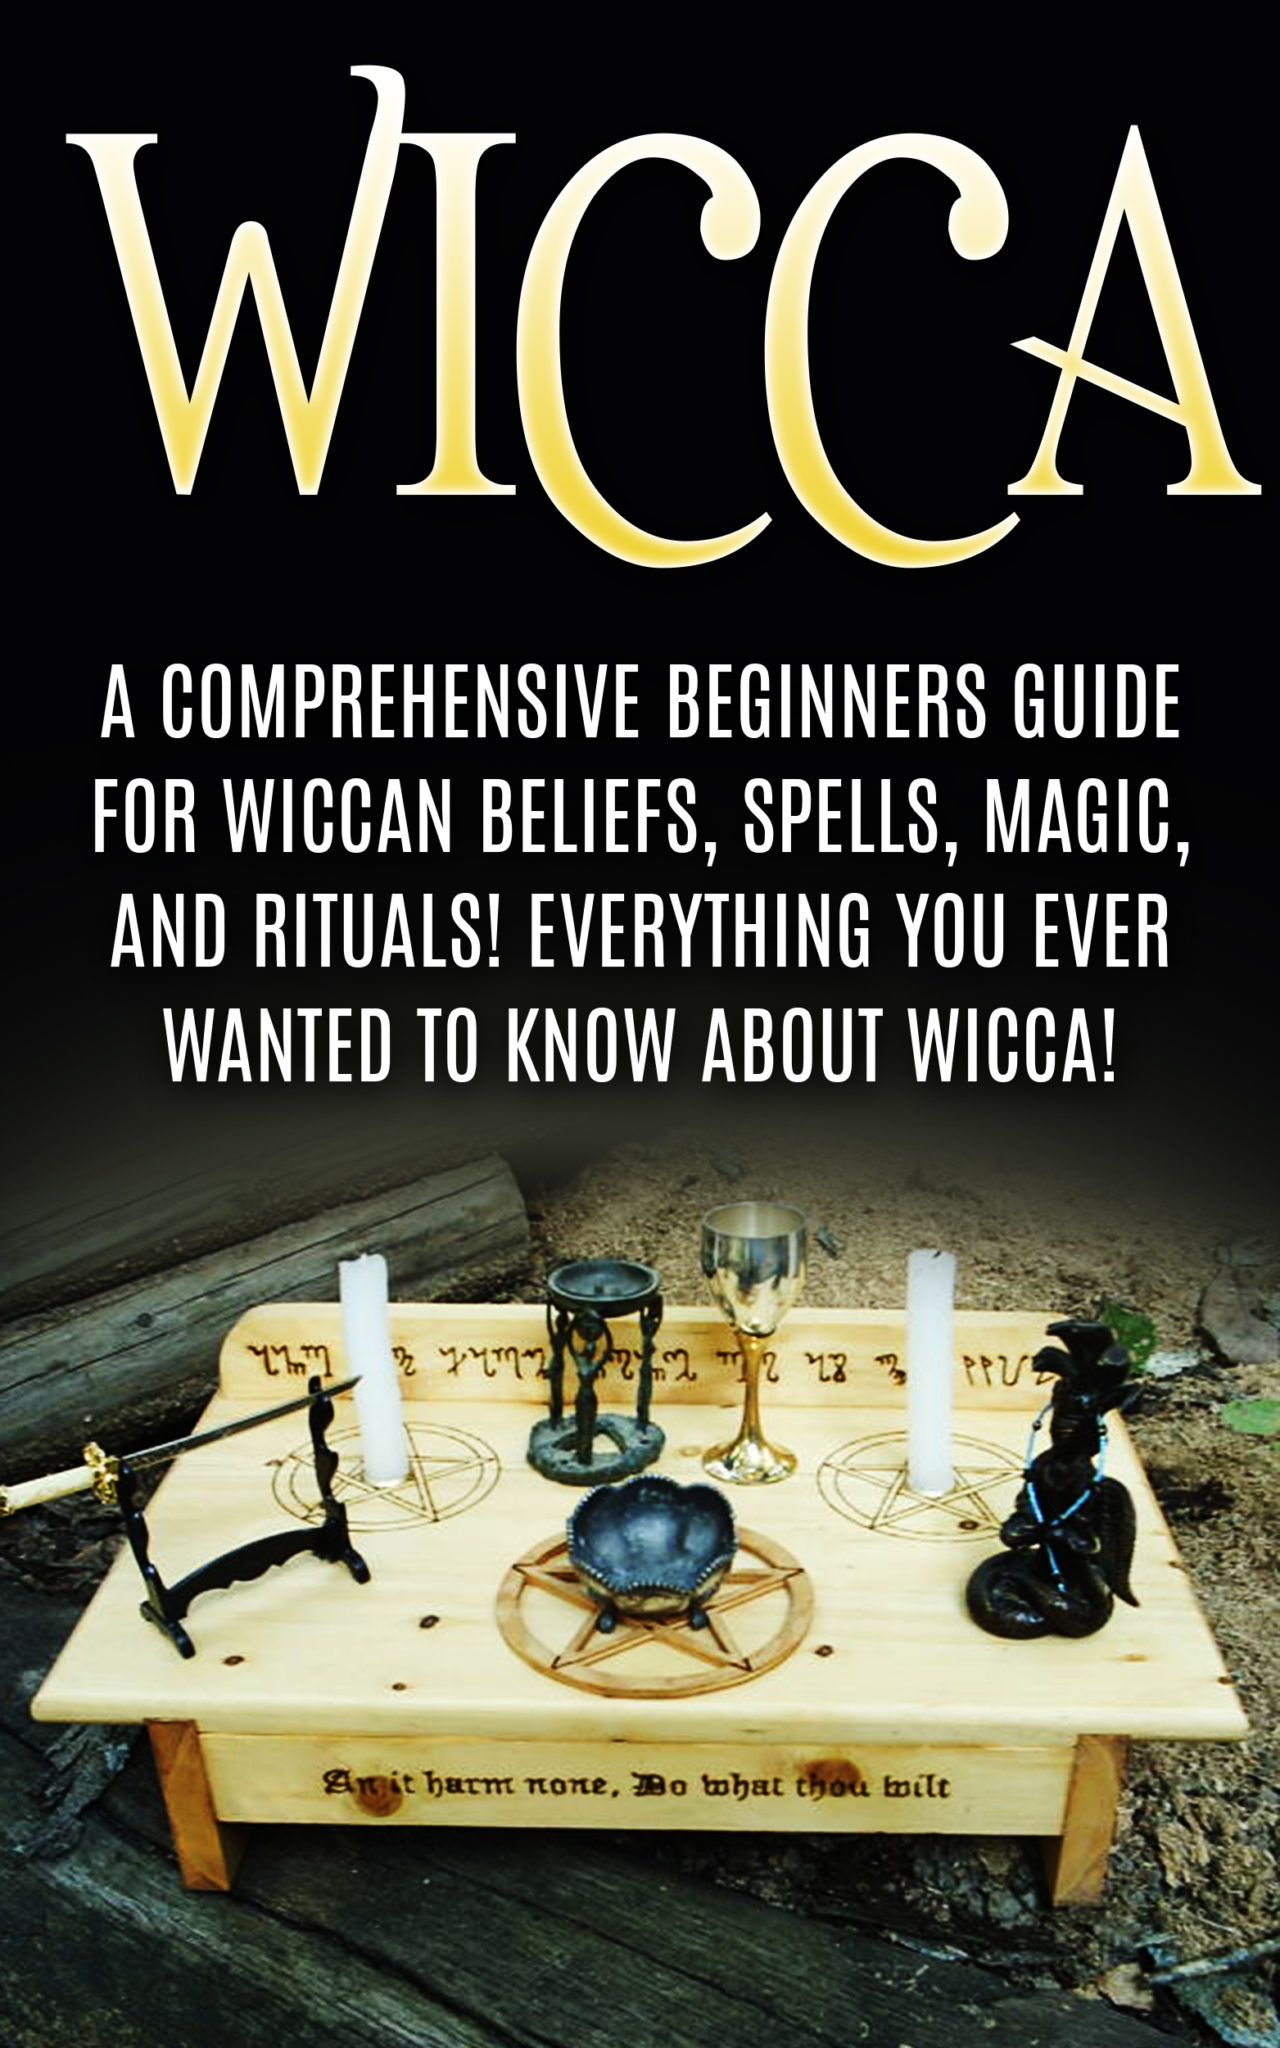 FREE: Wicca: Wiccan Beliefs, Spells, Magic, and Rituals, for Beginners! Everything You Ever Wanted to Know About Wicca! by Emily MacLeod